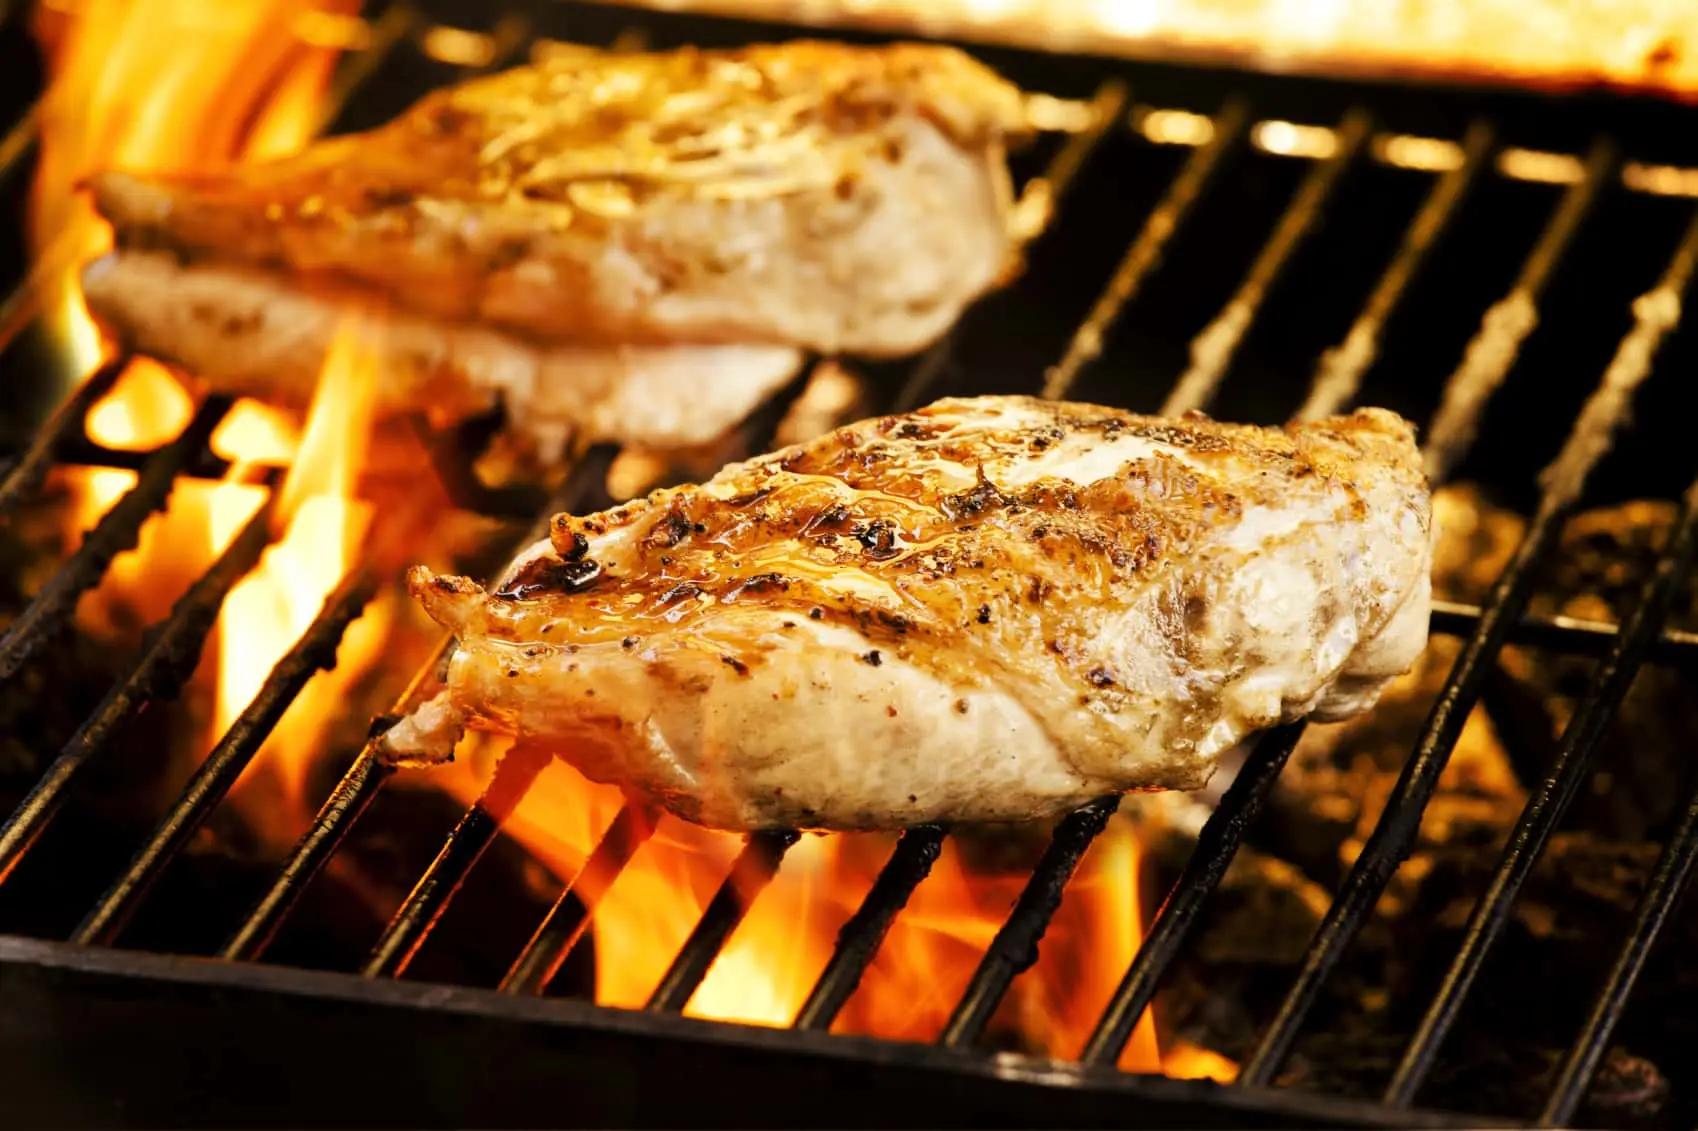 Grilled Chicken: Savor The Juicy Flavor And Ultimate Delight